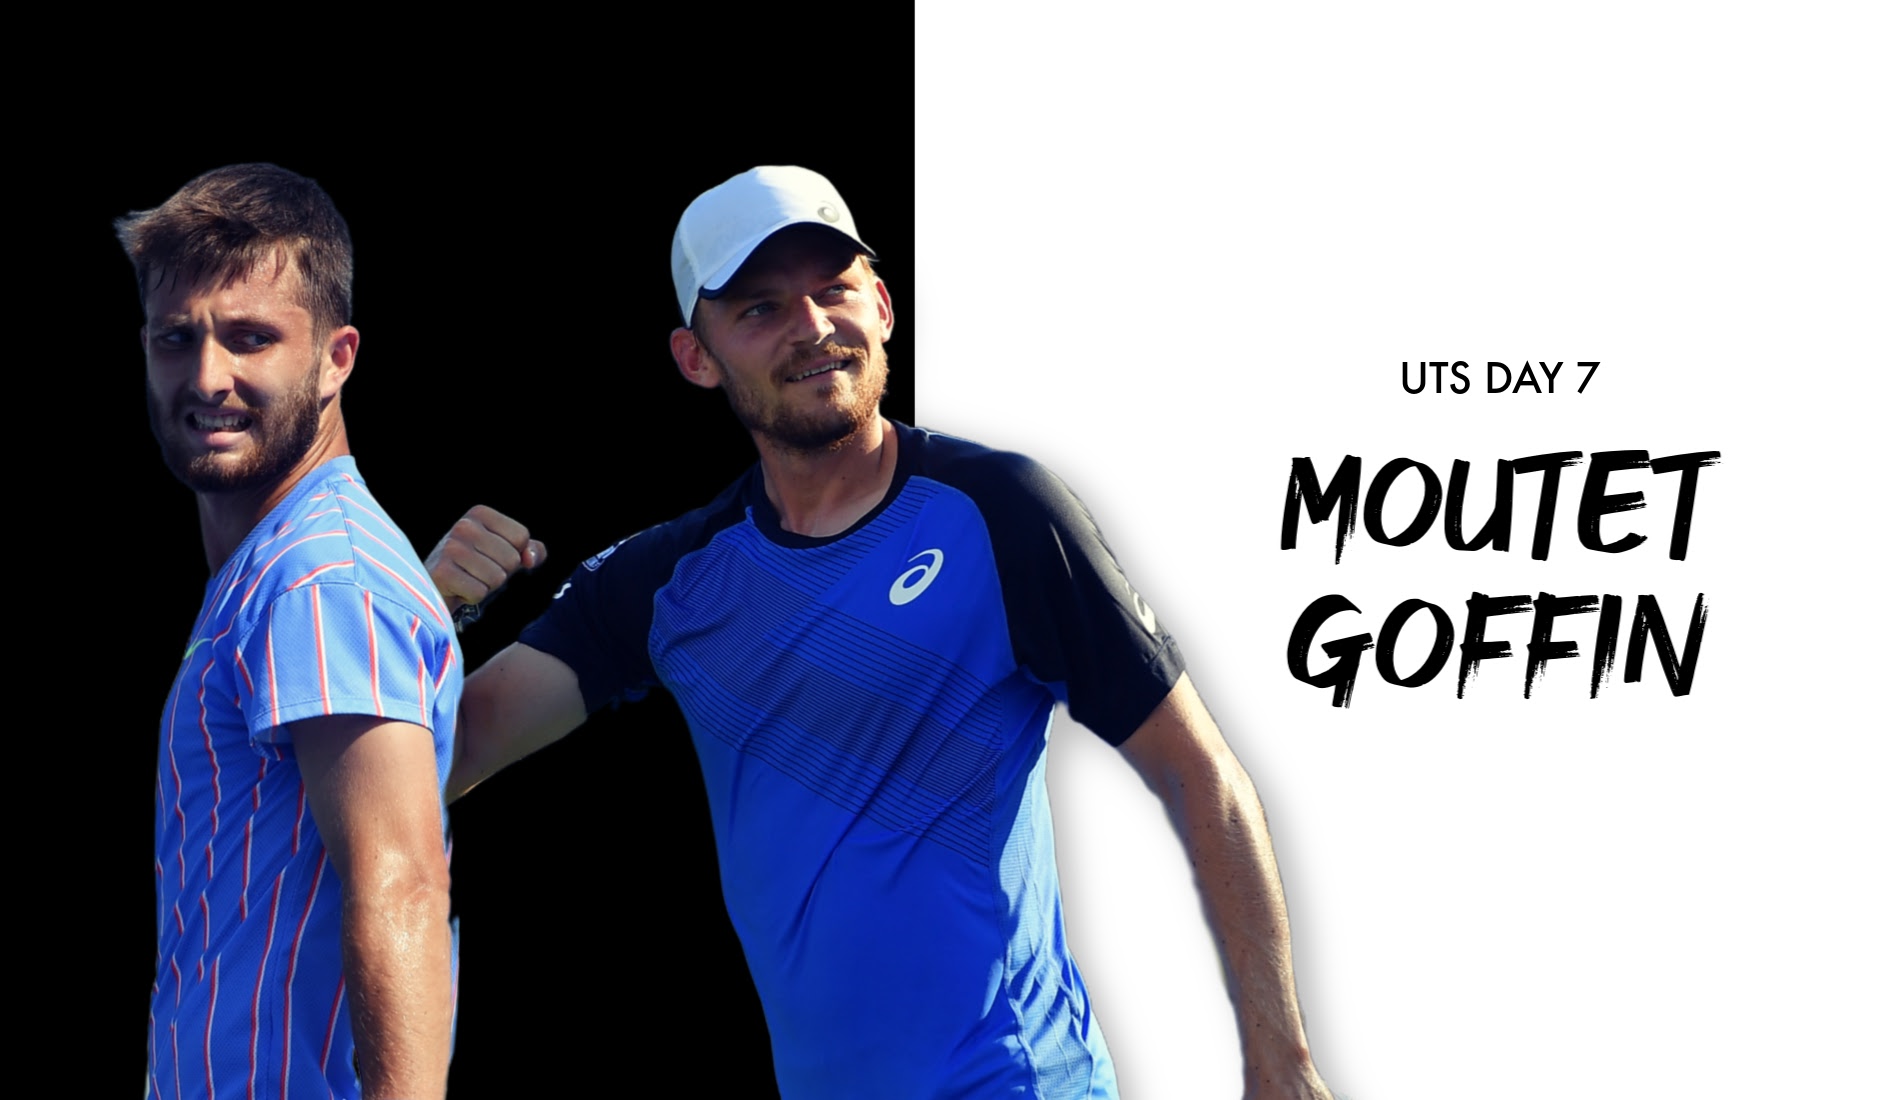 UTS1 - Day 7: Corentin Moutet "The Tornado" vs David Goffin "The Wall"